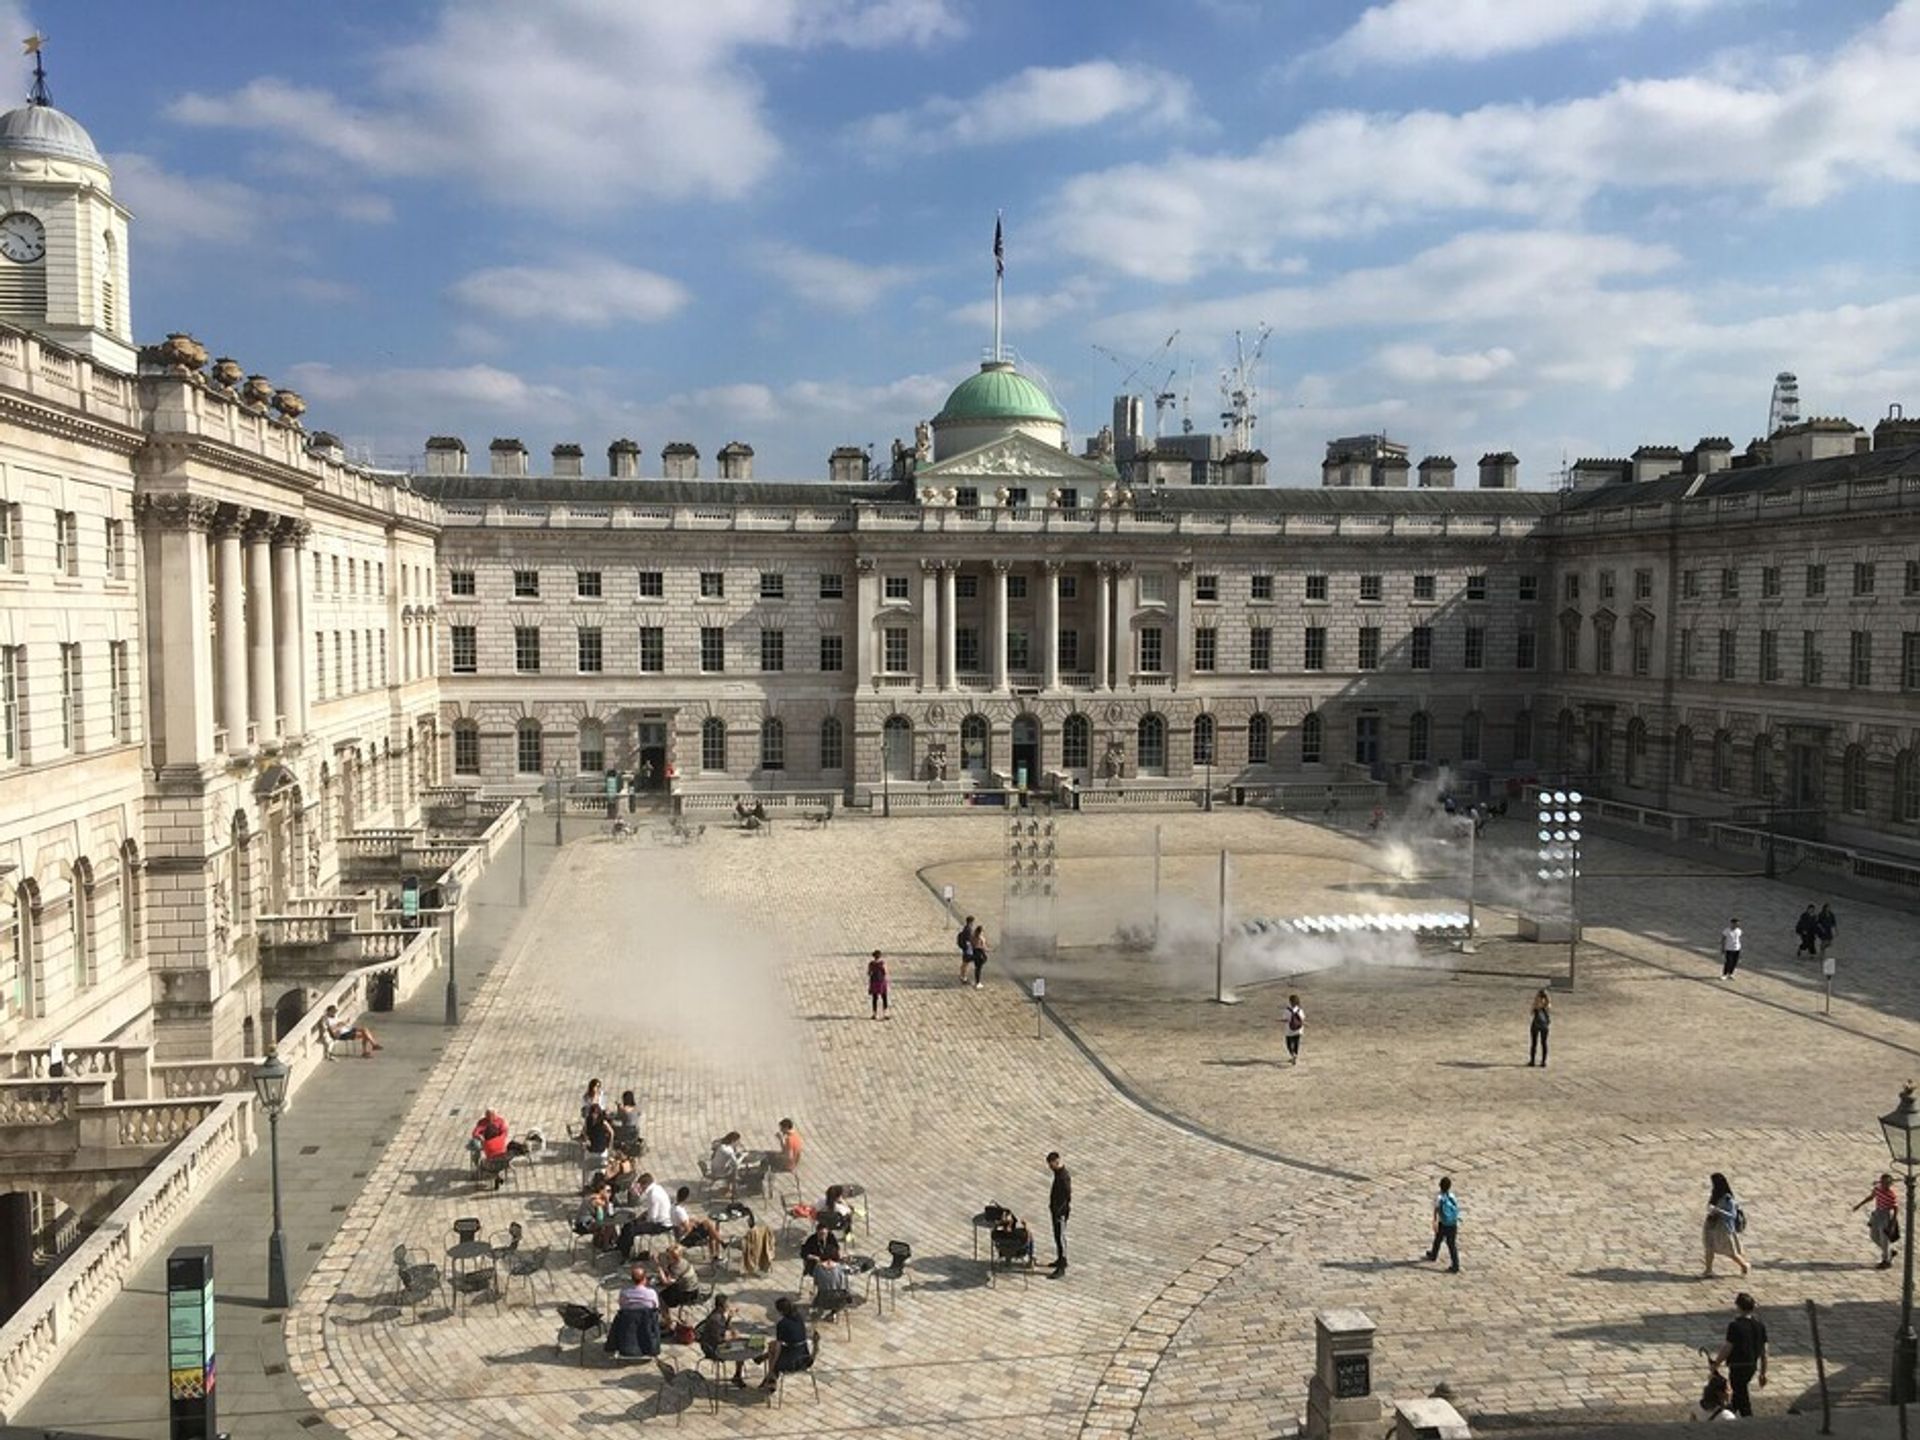 The Courtauld Institute of Art is based in Somerset House on The Strand, London